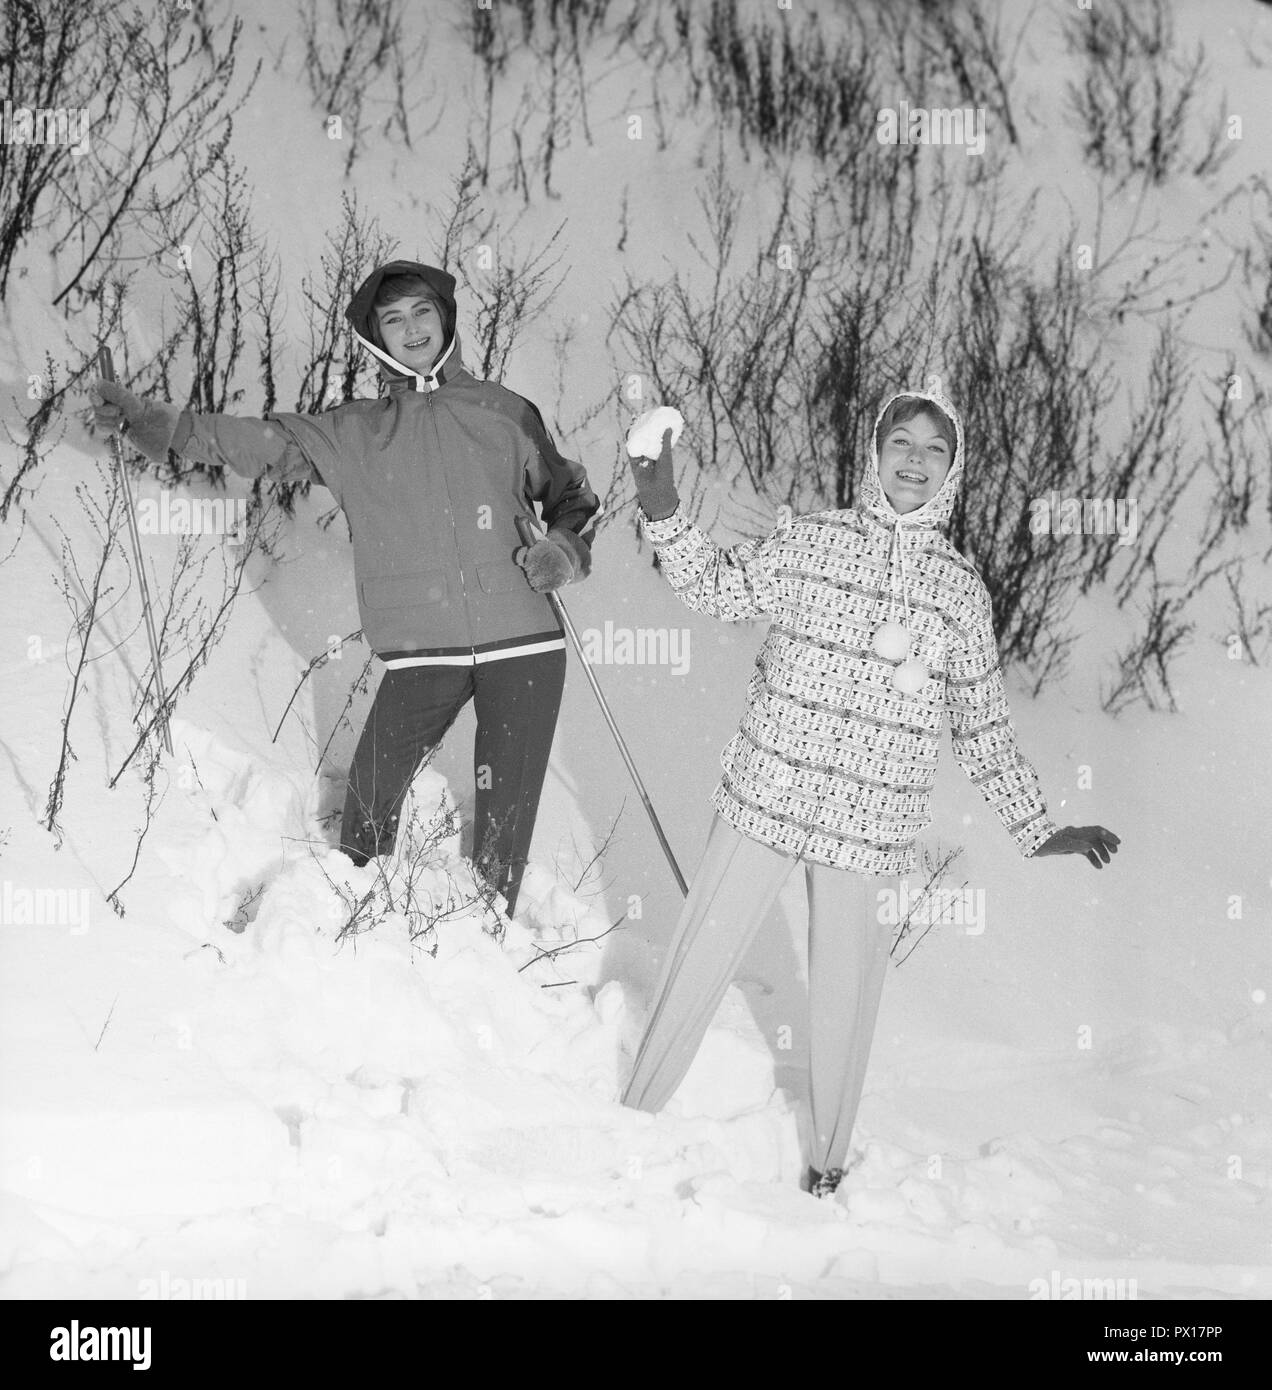 Winter fashion the 1950s. Two young women models this years winter clothes. They are wearing the typical 50s sports jackets and spandex sports trousers.  Sweden January 1959. Stock Photo